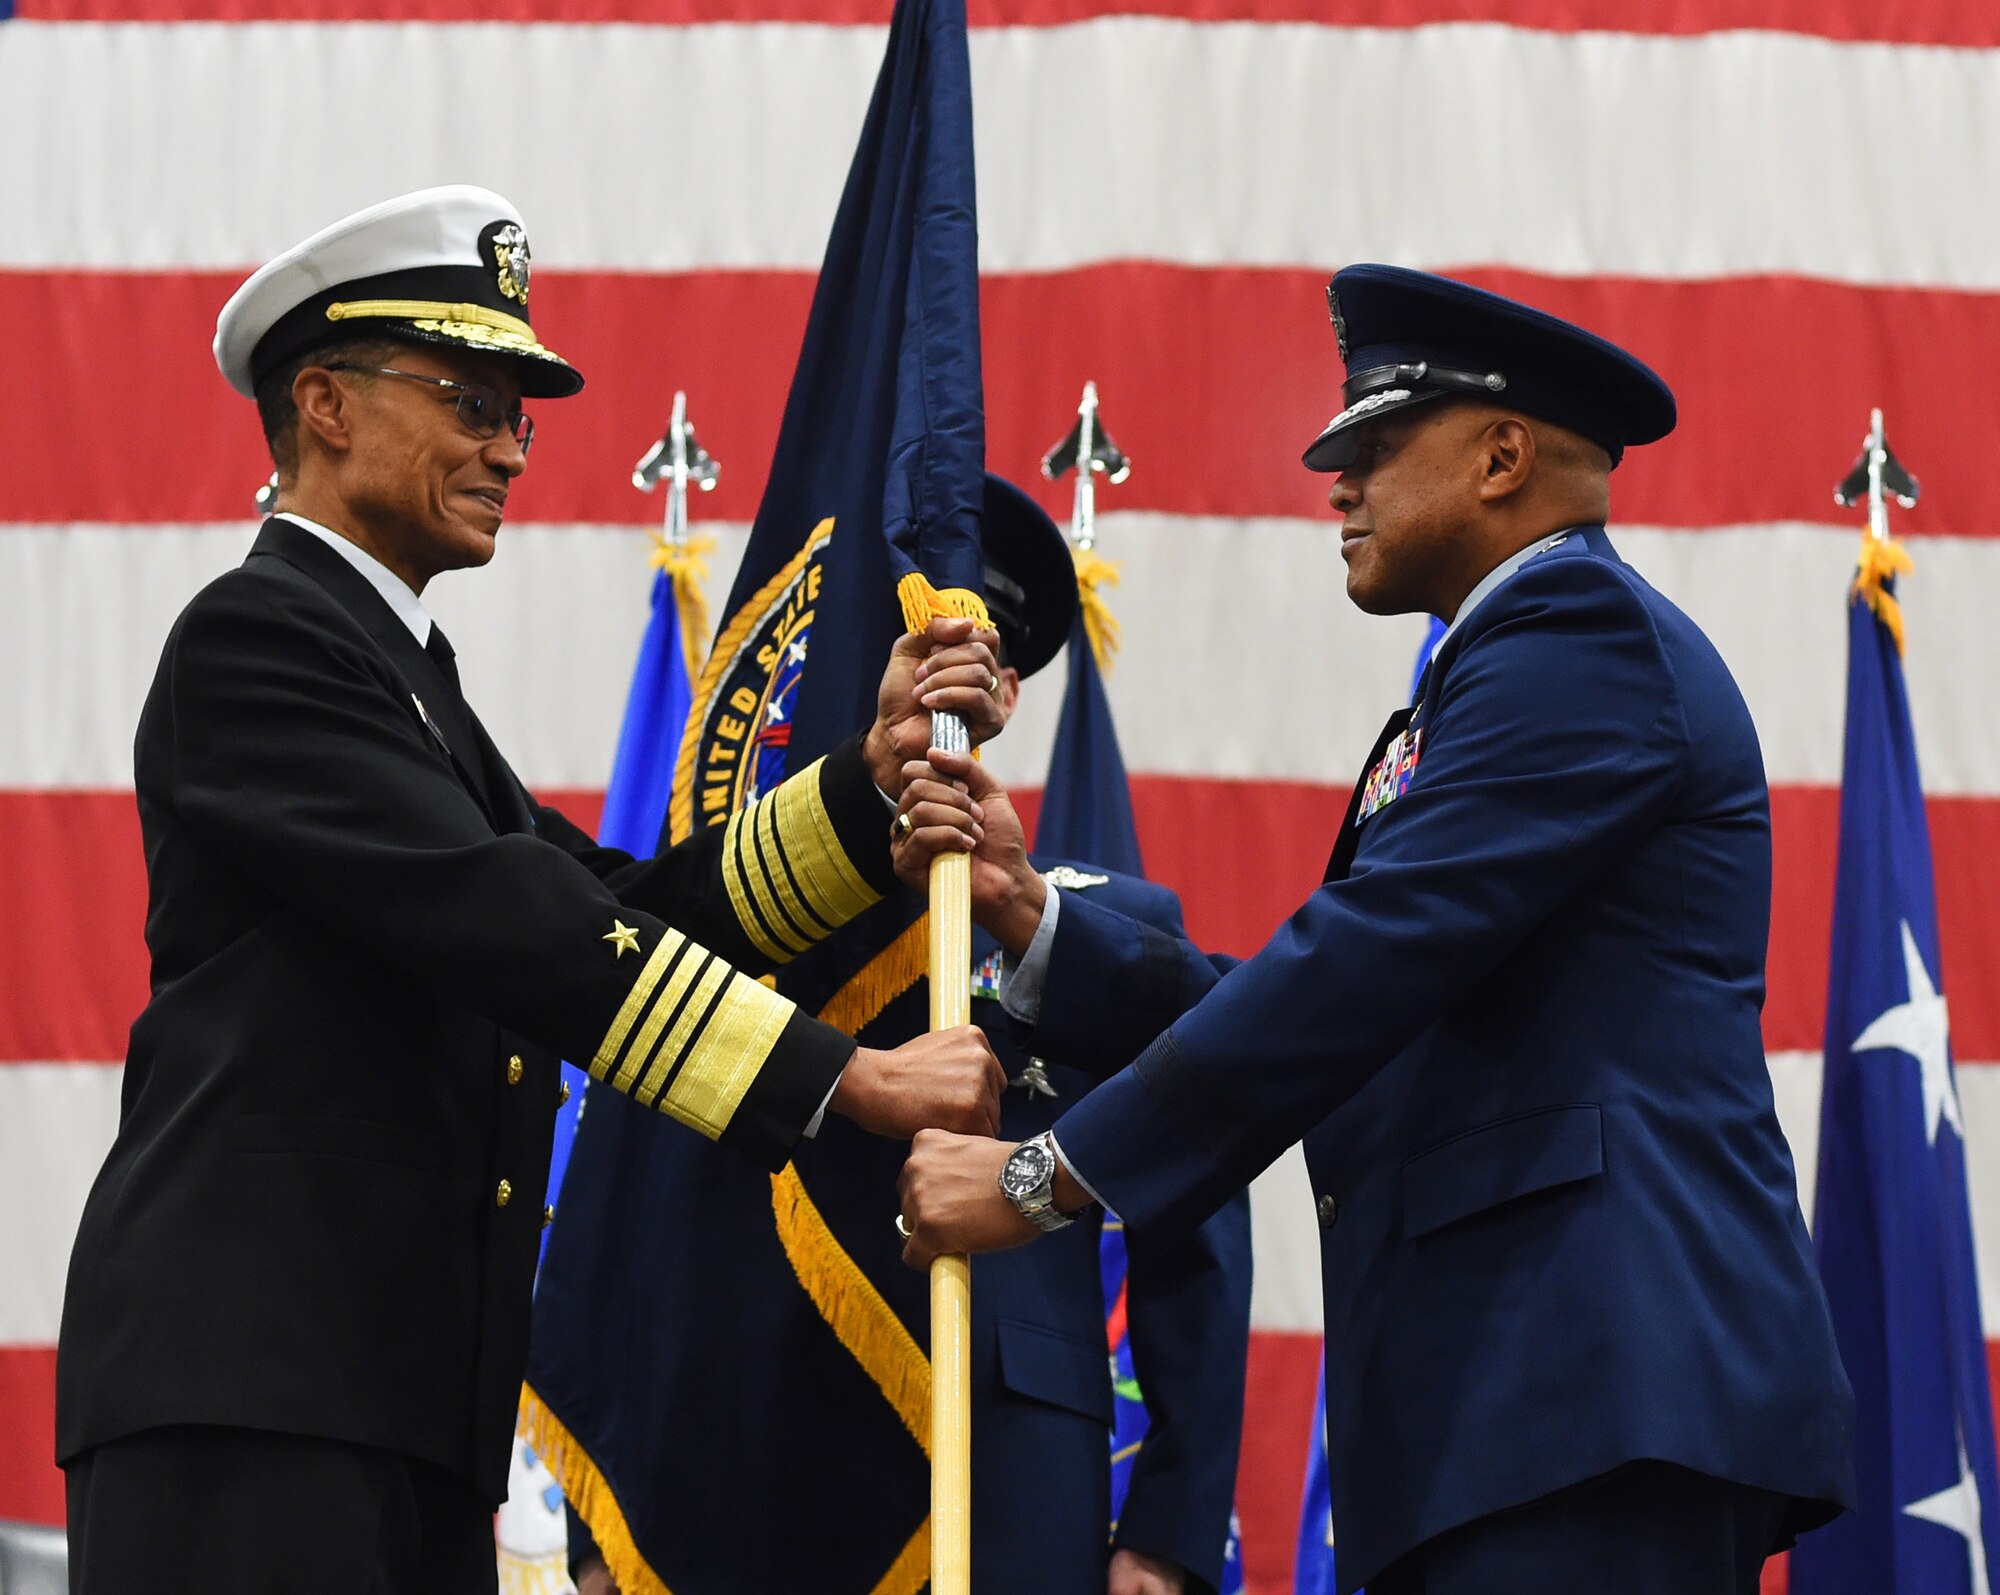 Adm. Cecil D. Haney, U.S. Strategic Command commander, presents the Task Force 214 guidon to Maj. Gen. Anthony J. Cotton as Cotton takes command of the task force during a ceremony on F.E. Warren Air Force Base, Wyo., Nov. 16, 2015. Cotton also took command of 20th Air Force from Gen. Robin Rand,
Air Force Global Strike Command commander, during the same ceremony. The task force provides the President of the United States with responsive and highly reliable strategic missile forces, and supports USSTRATCOM's strategic deterrence mission by operating and maintaining the Air Force's Intercontinental Ballistic Missile force. USSTRATCOM, one of nine DoD unified combatant commands, relies on various task forces for the execution of its global missions, which also include space operations; cyberspace operations; joint electronic warfare; global strike; missile defense; intelligence, surveillance and reconnaissance; combating weapons of mass destruction; and analysis and targeting. (U.S. Air Force photo by R.J. Oriez/Released)